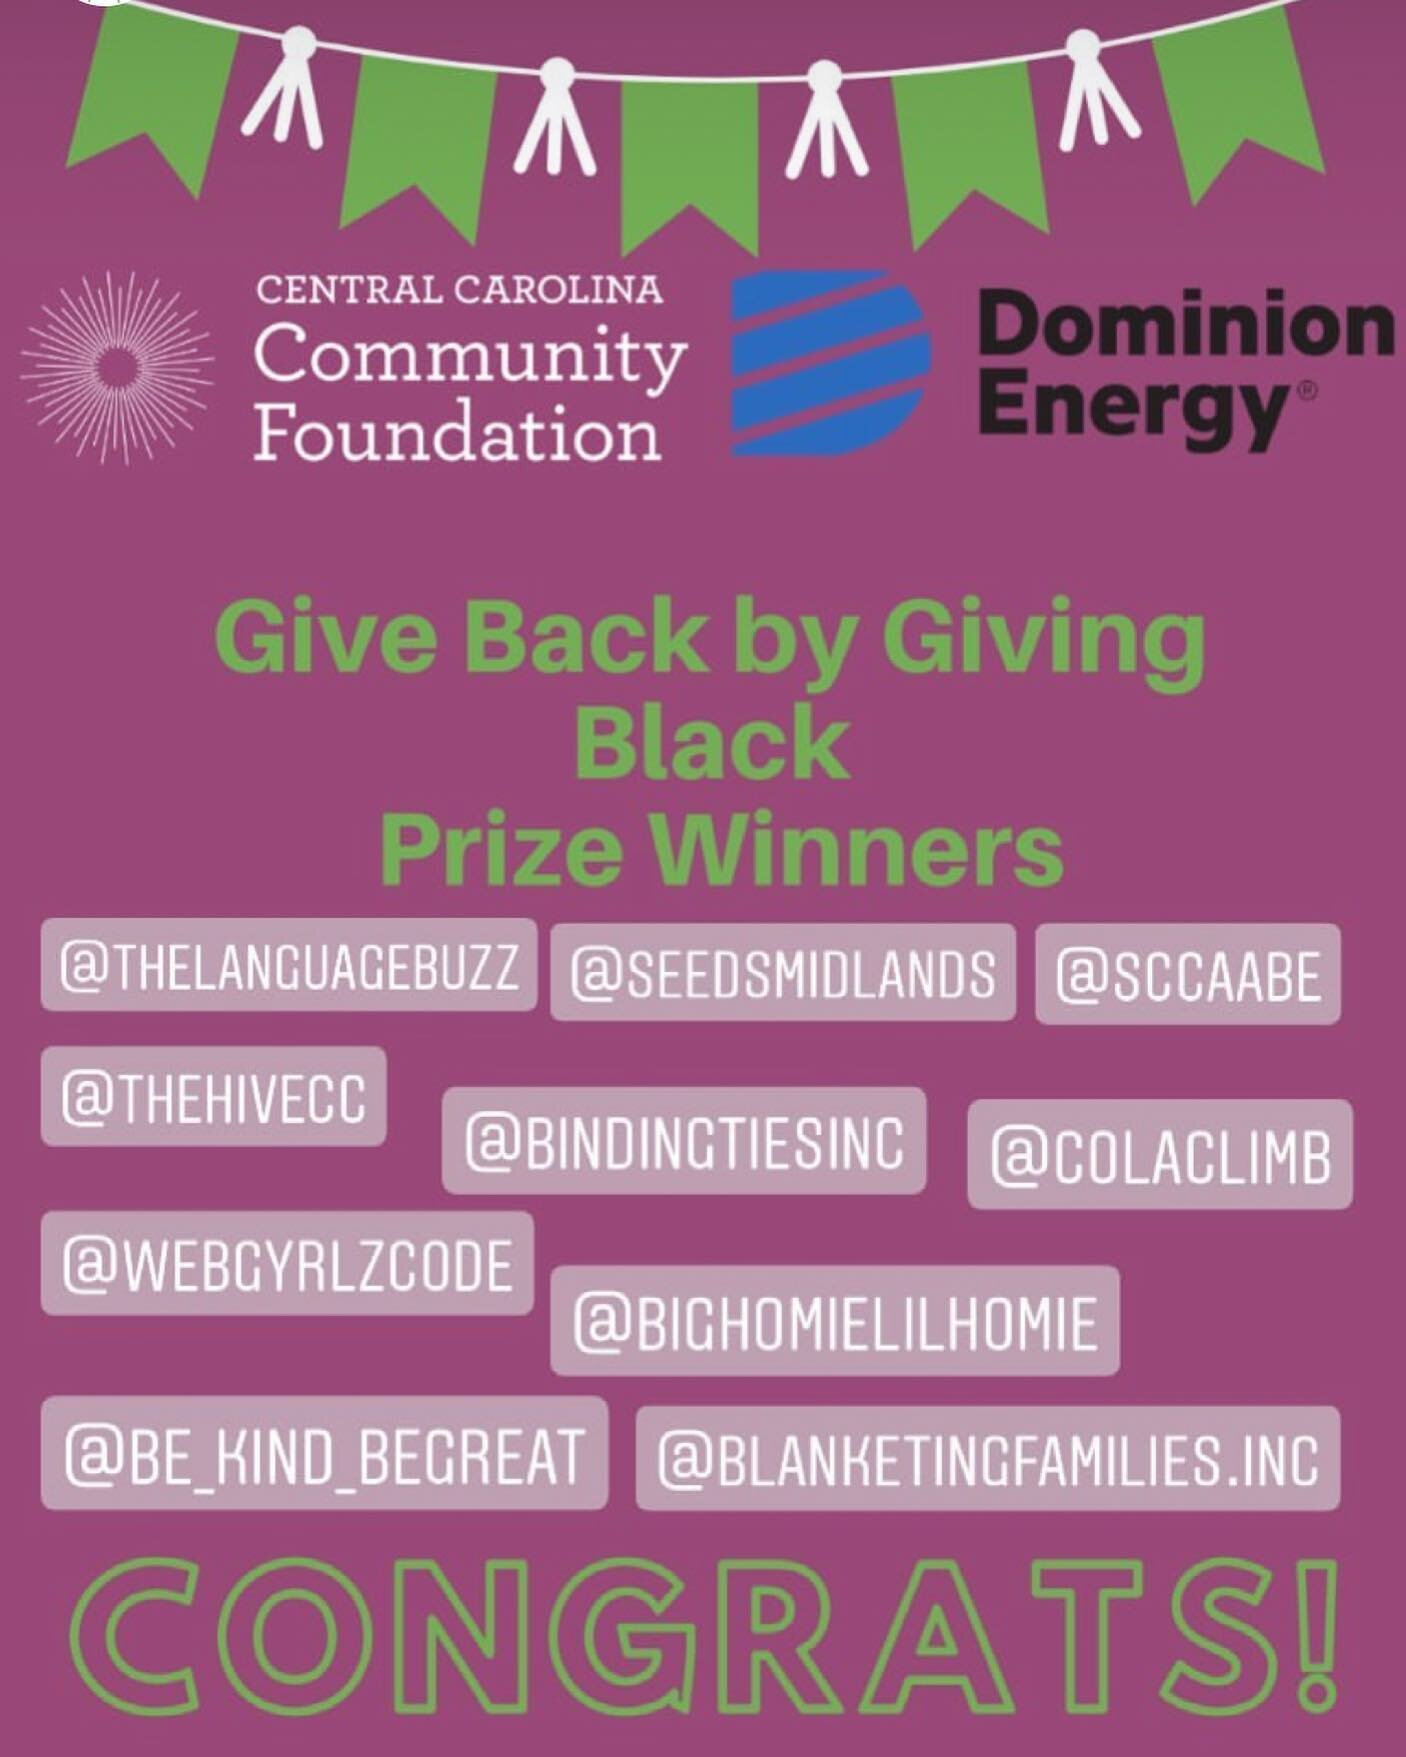 We won one of the $500 Give Back by Giving Black prizes from Dominion Energy! 🥳❤️🌱 Thanks so much everyone!